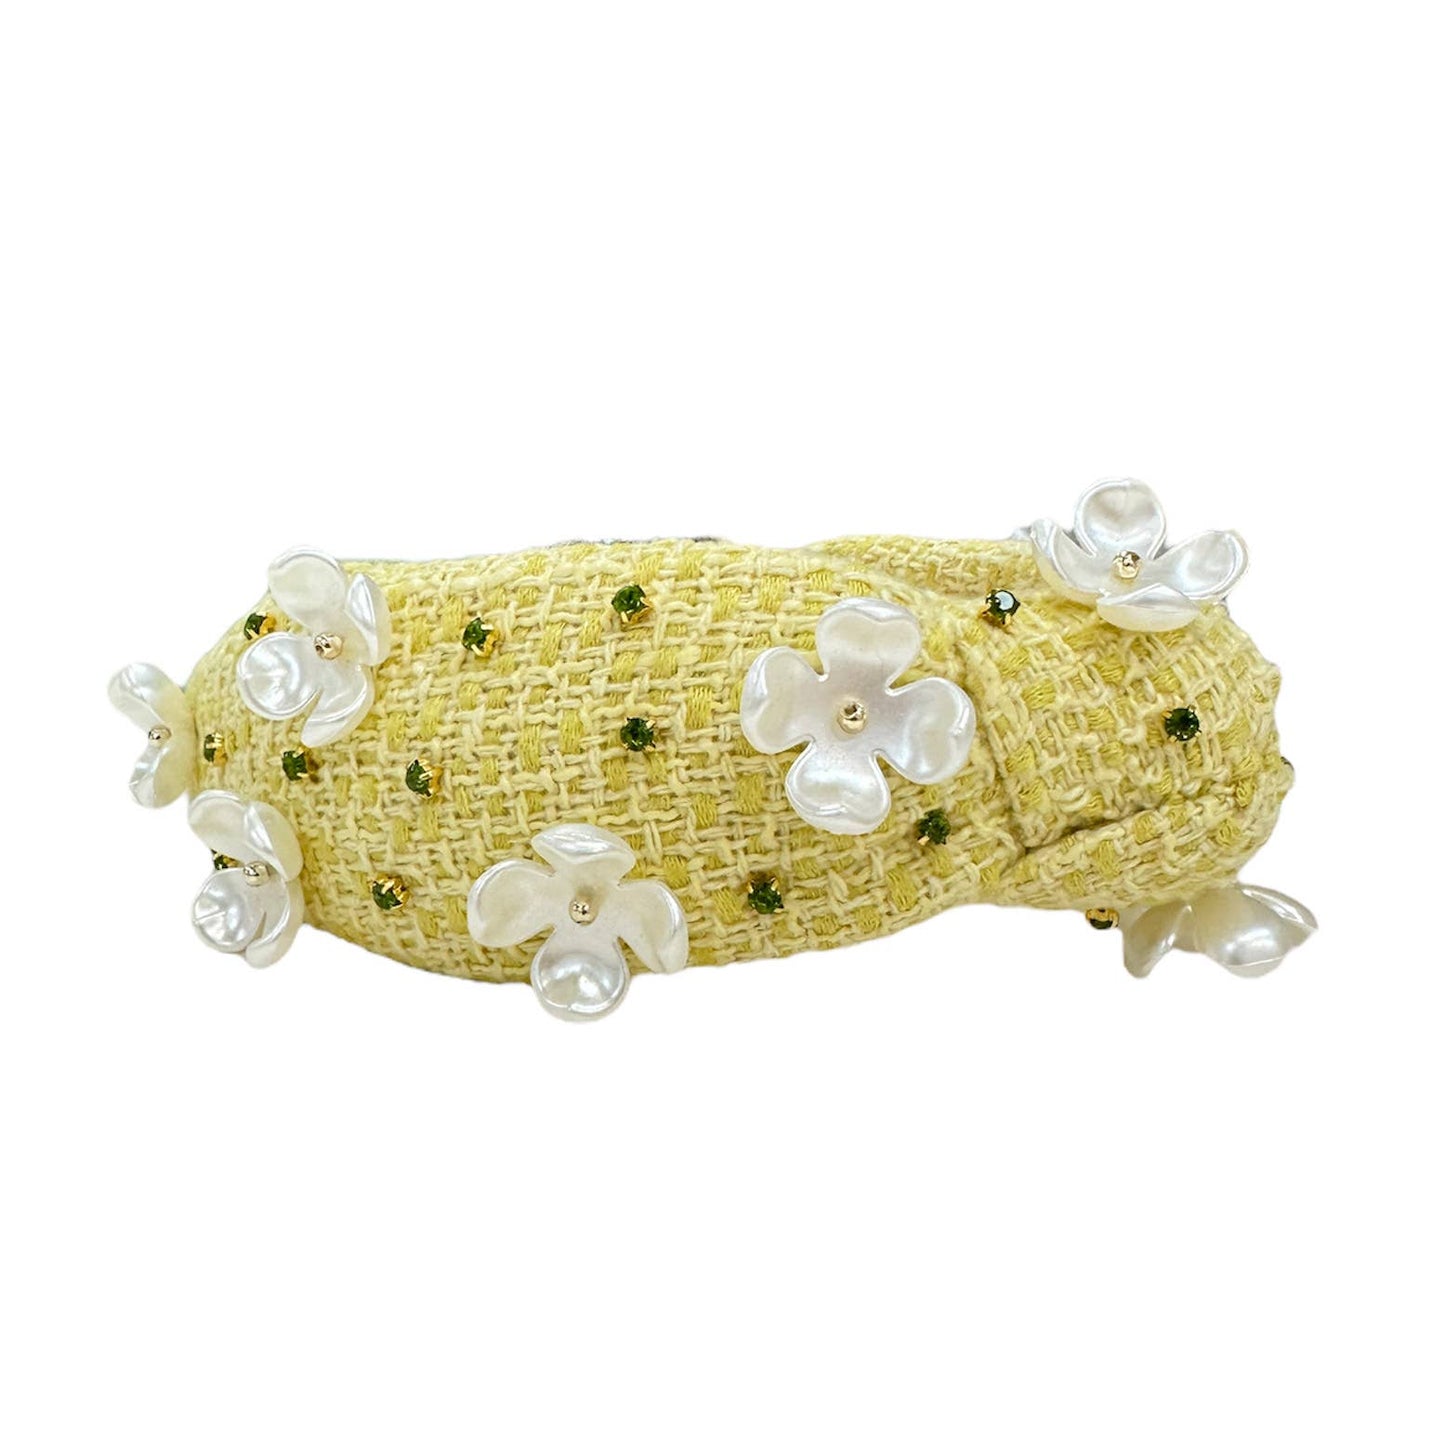 Spring Yellow Tweed Embellished Knotted Headband